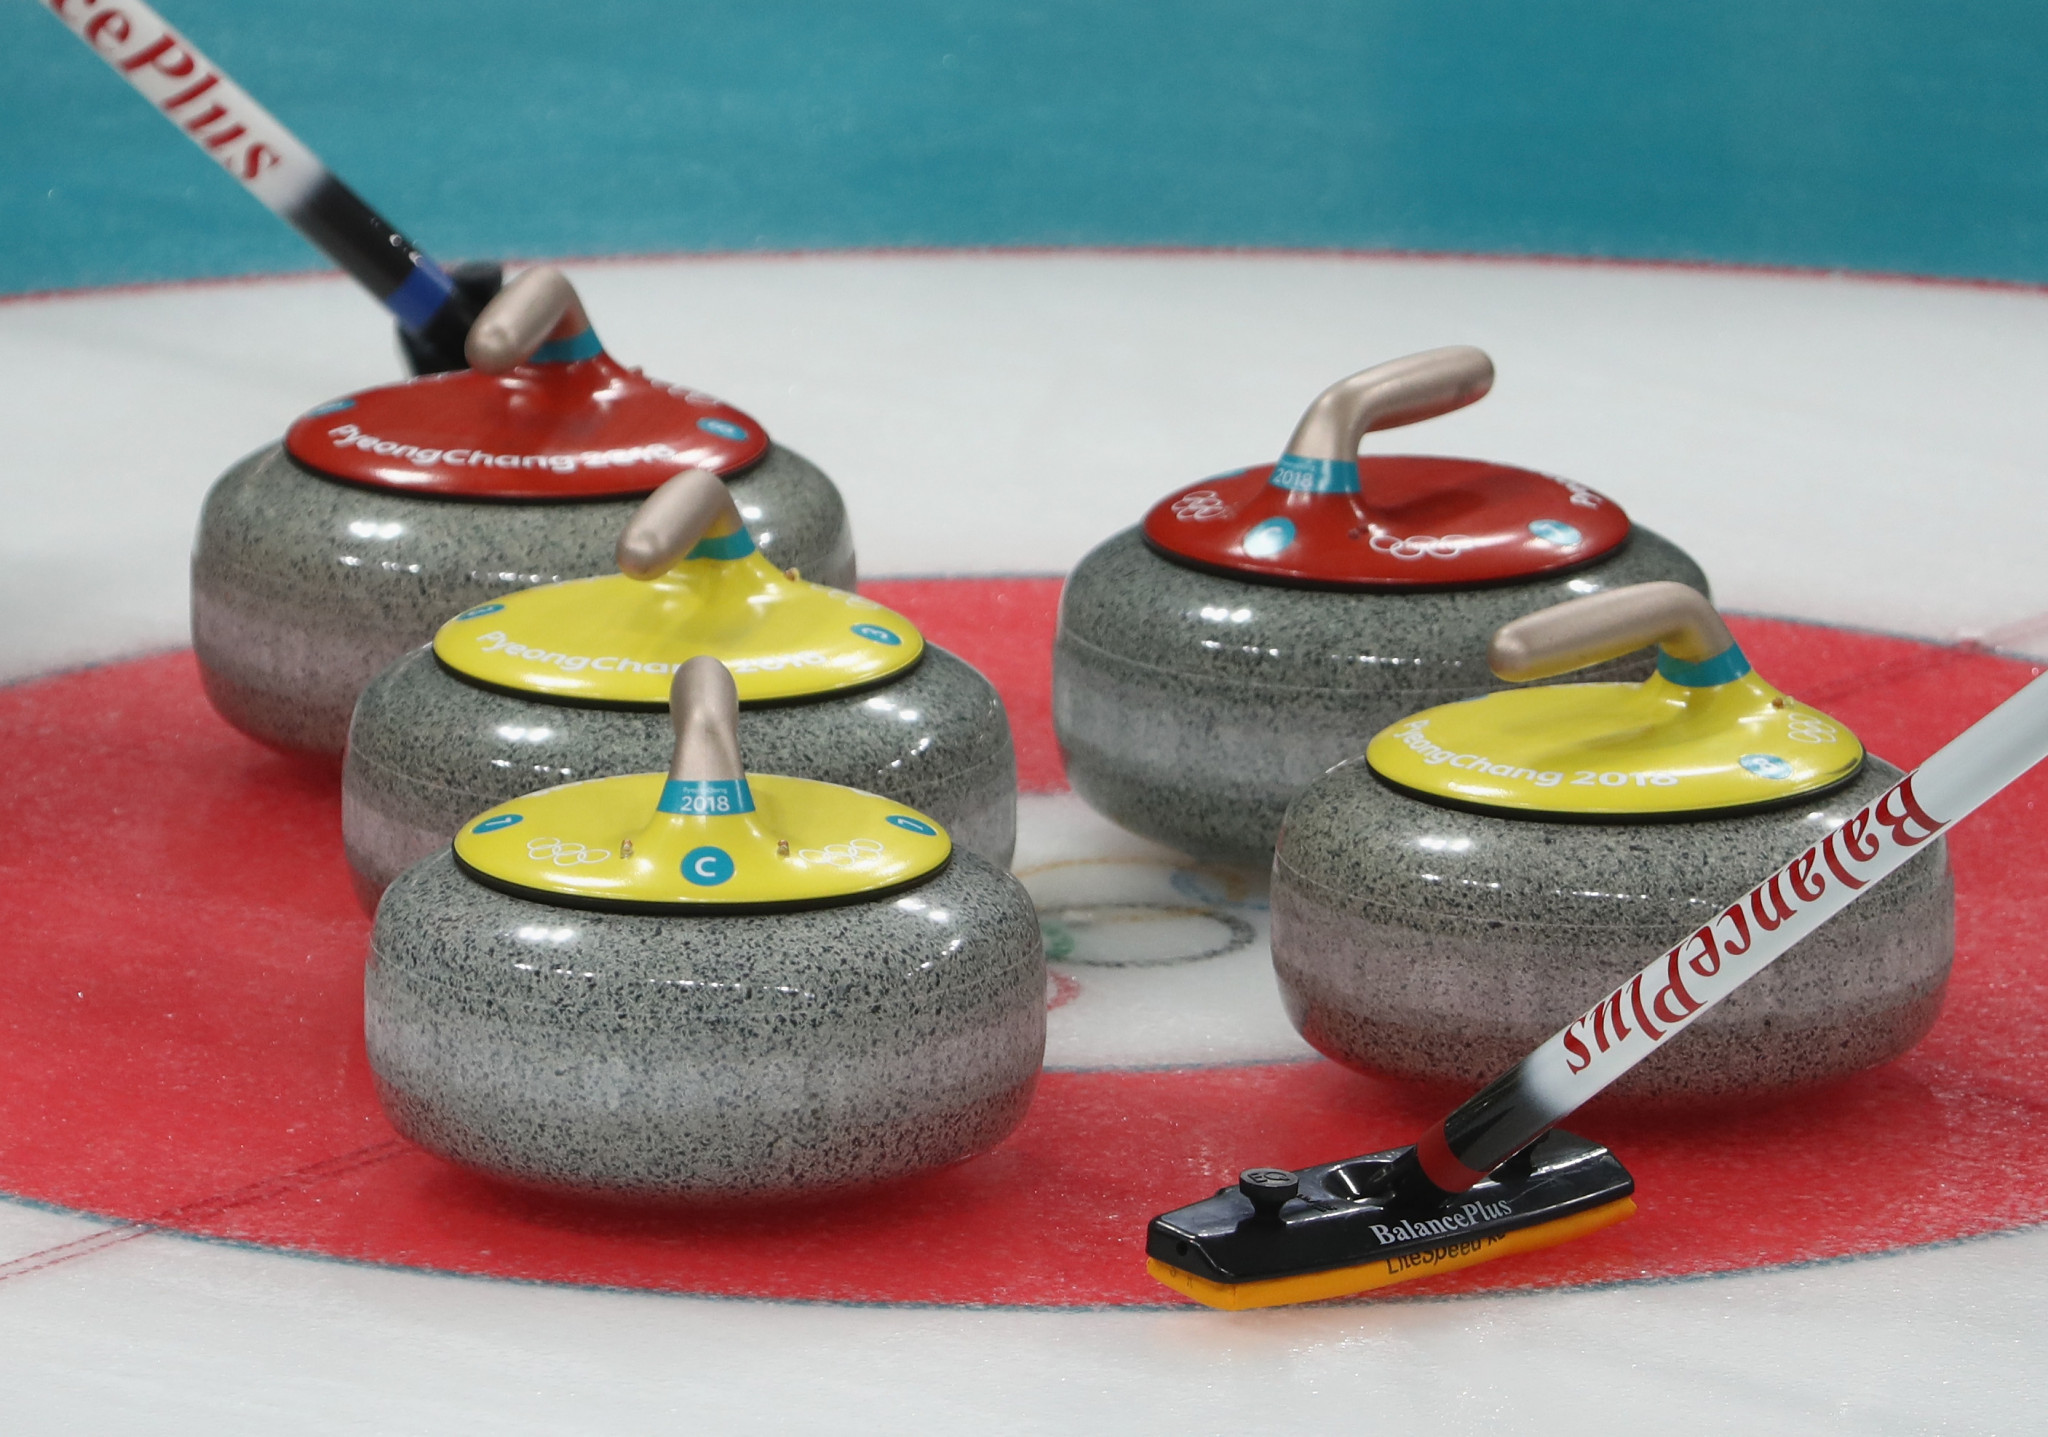 Kesley appointed as new President of Royal Caledonian Curling Club